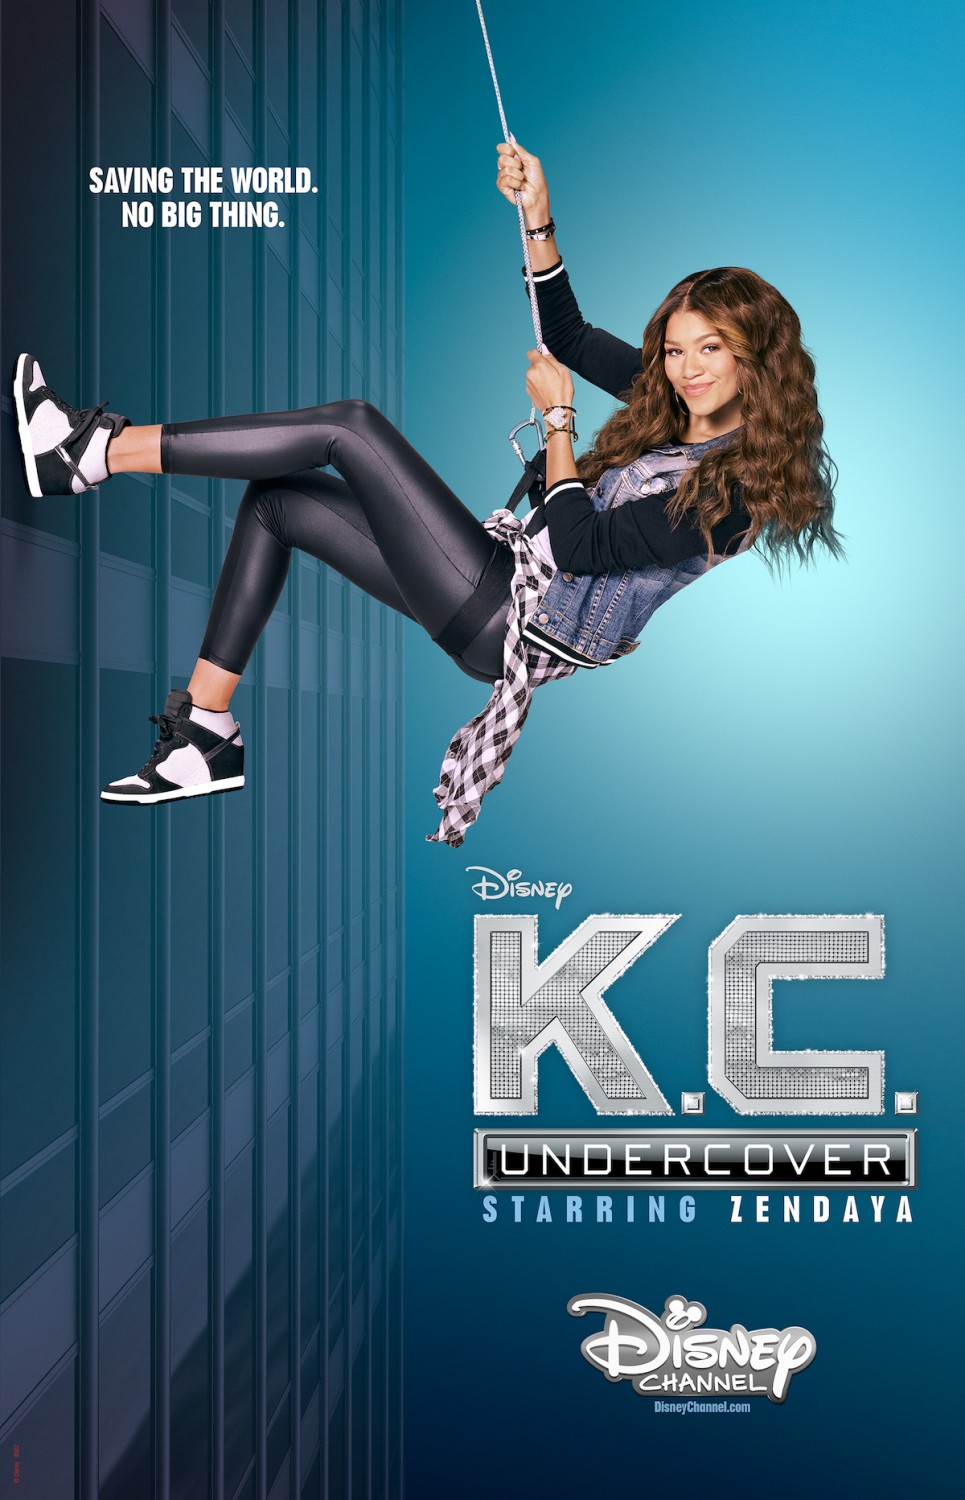 Extra Large TV Poster Image for K.C. Undercover 